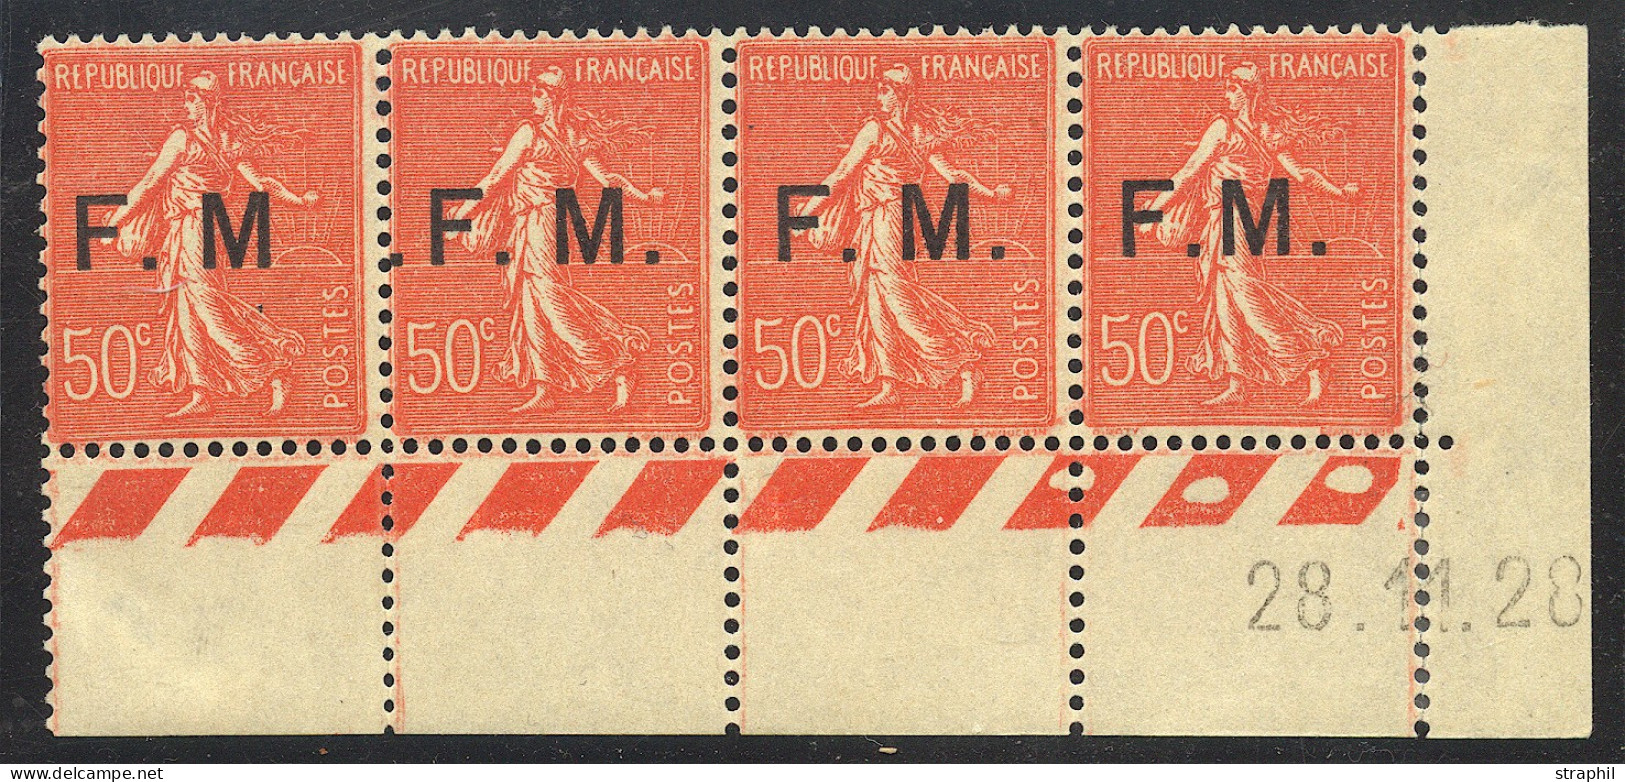 ** FRANCHISE MILITAIRE - Military Postage Stamps